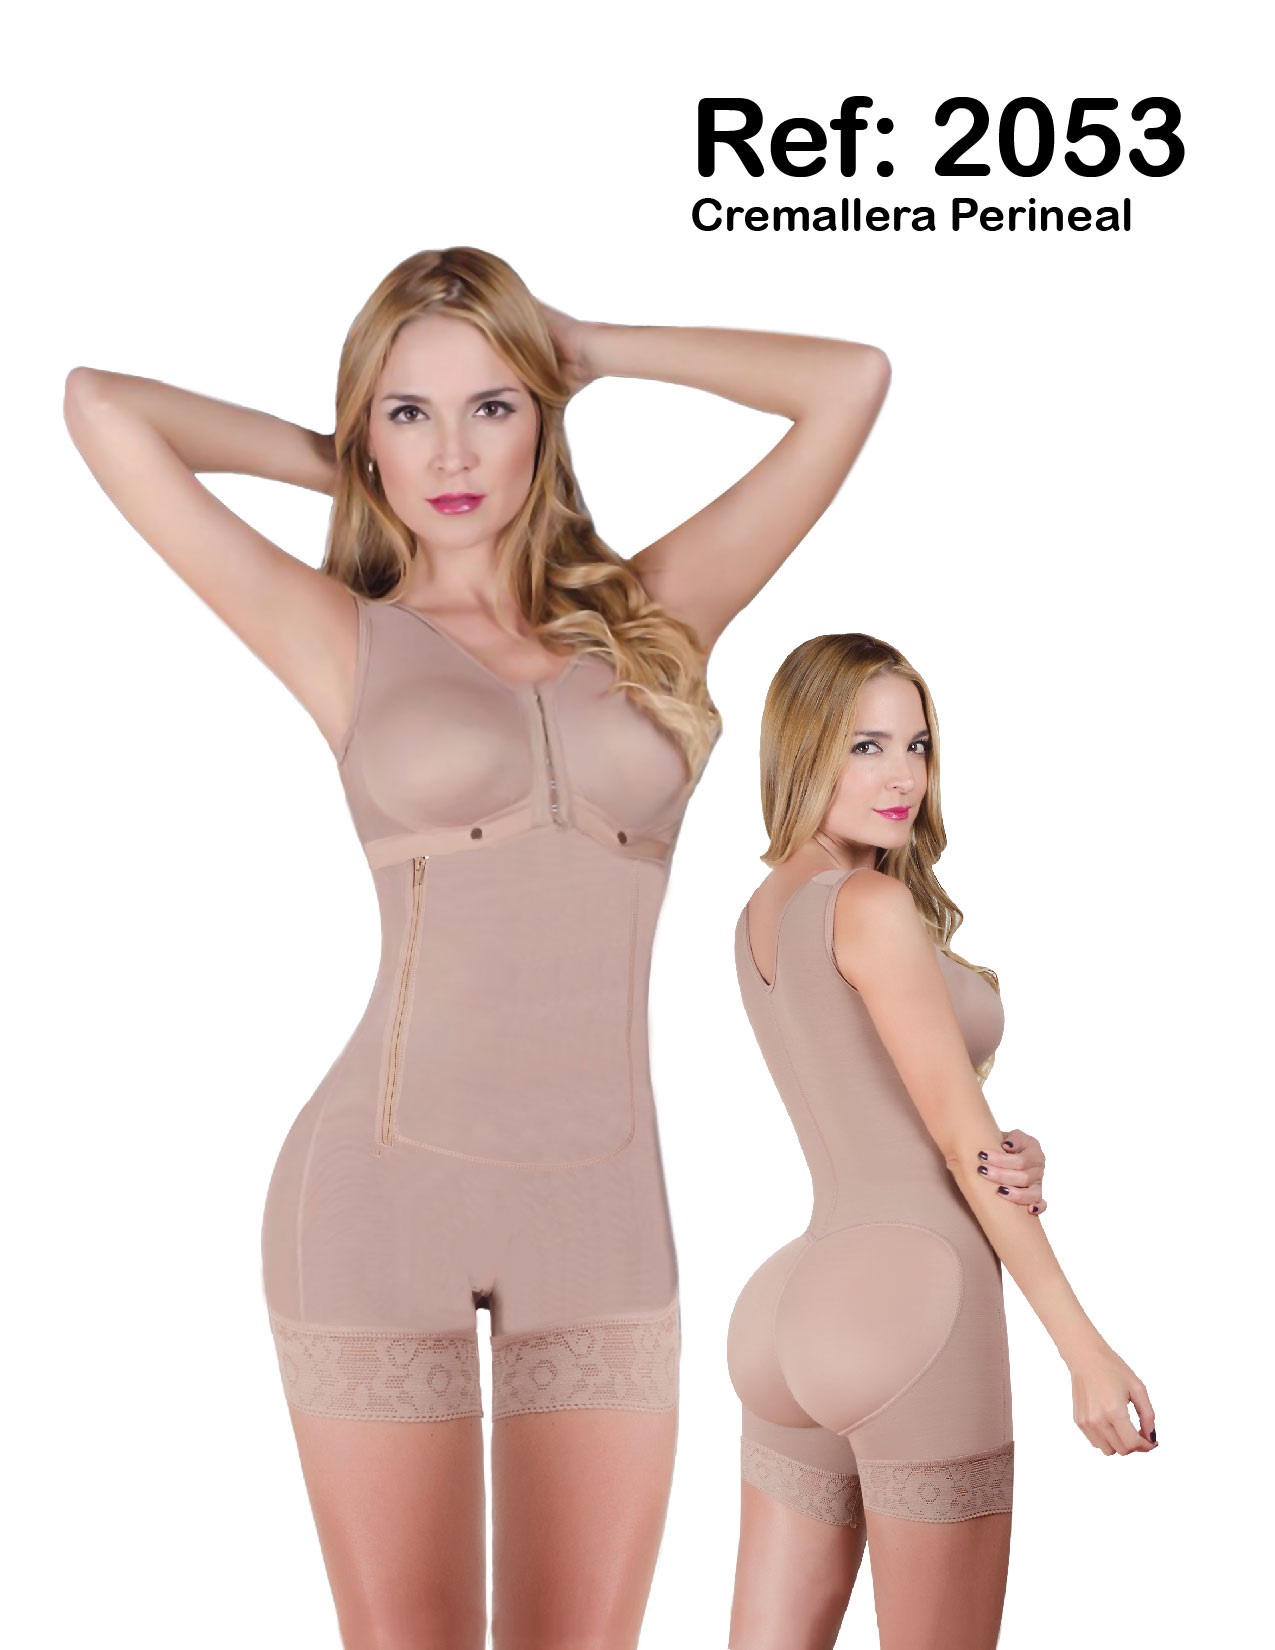 Shapewear & Fajas-Semaless No Zippers No Hooks No Straps Silicone Band  Sculpts Your Torso Lower Stomach Back Control Silicone Band Girdle 